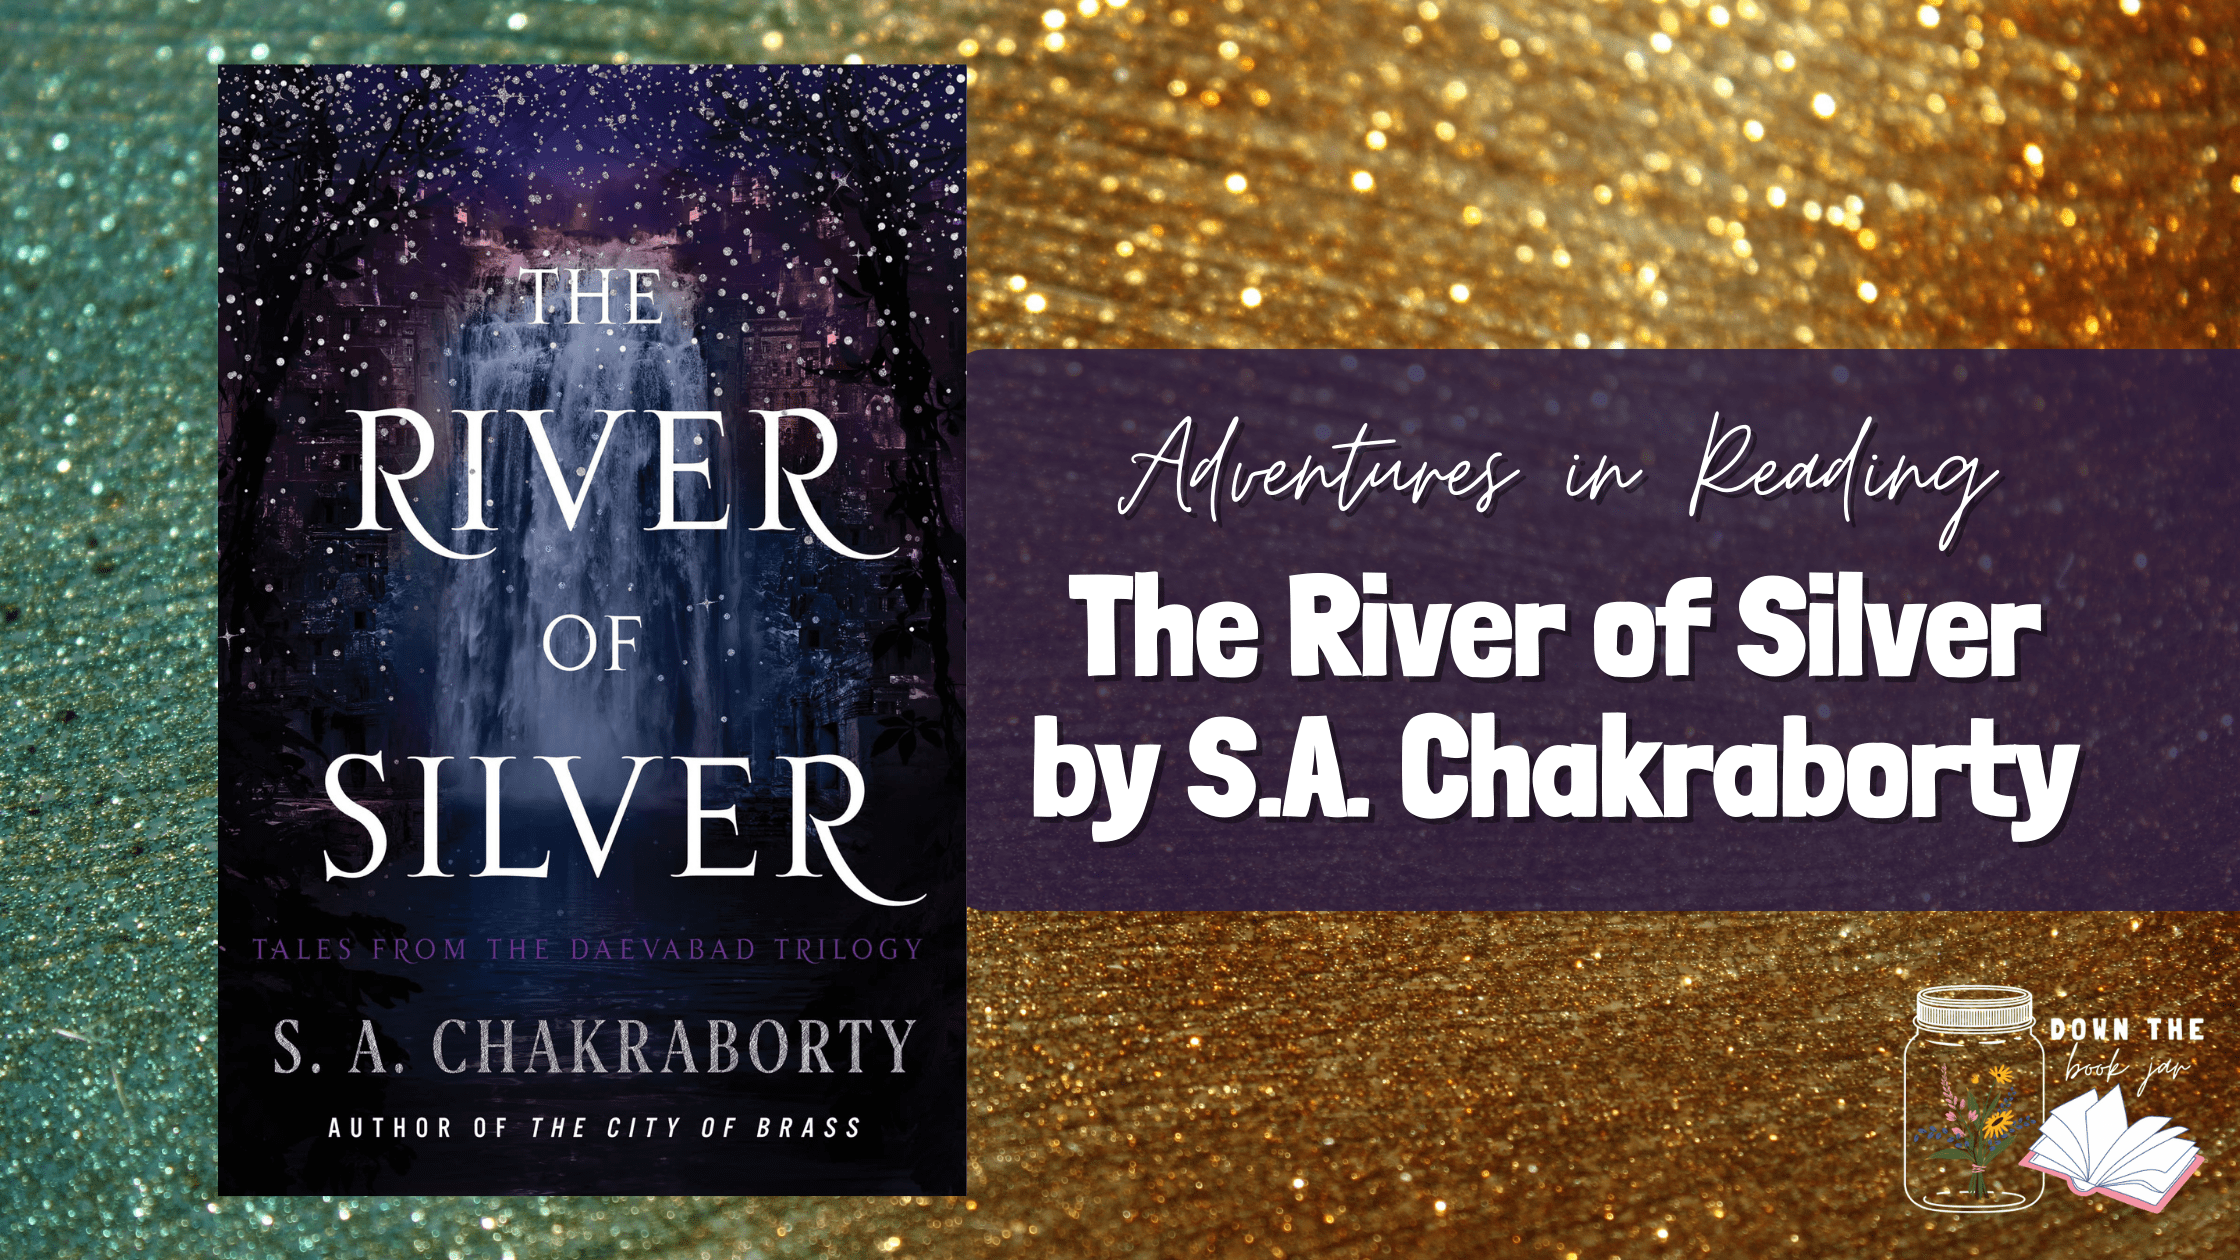 The River of Silver by S.A. Chakraborty